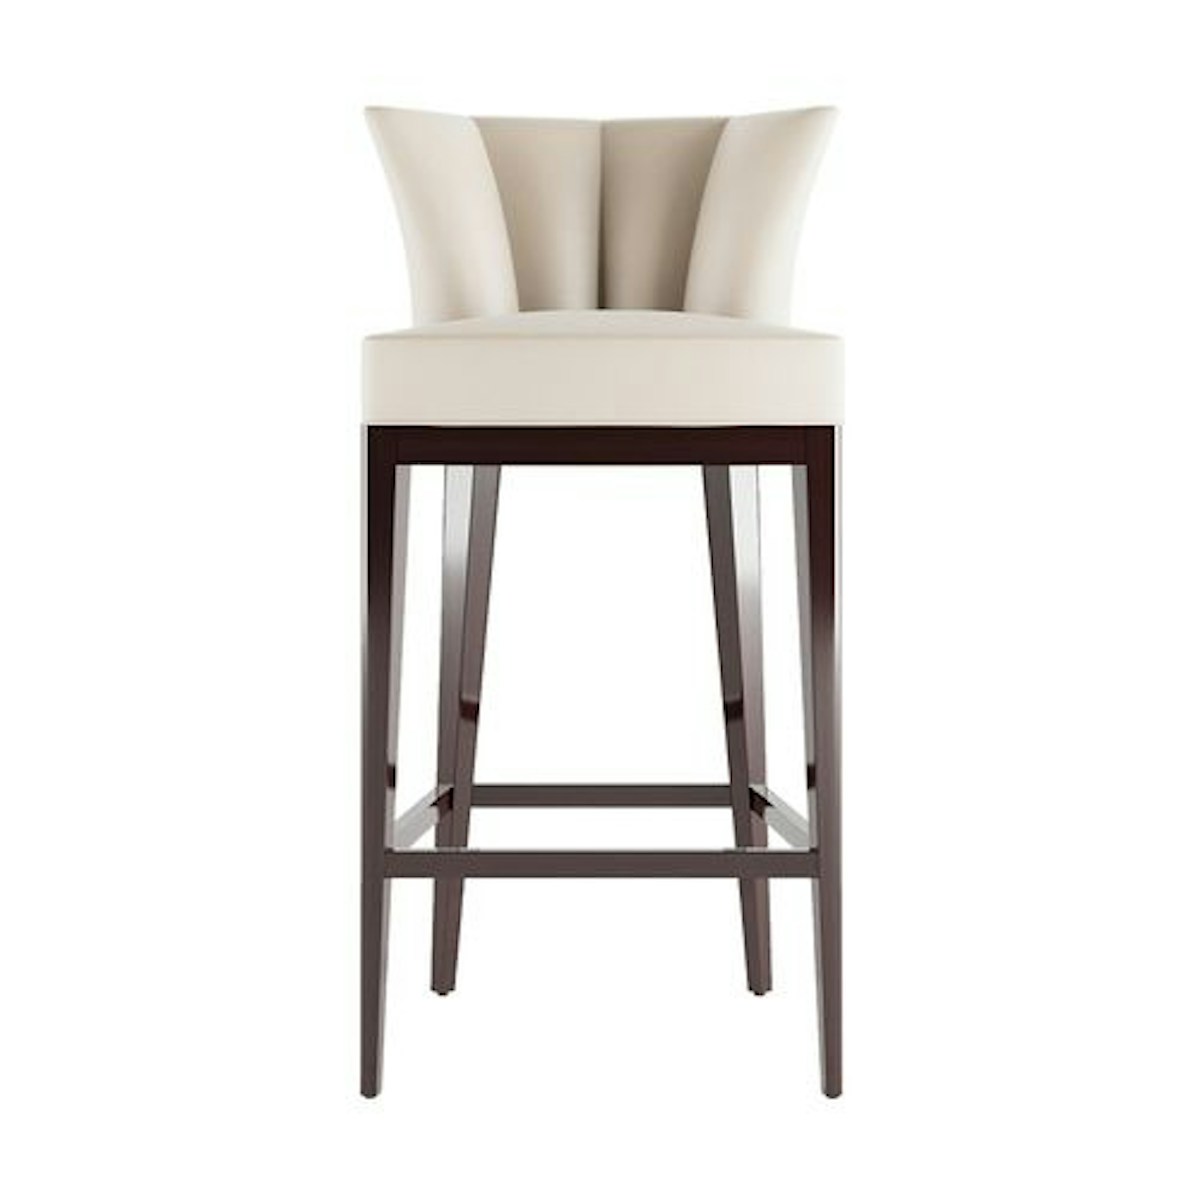 Fan Bar Chair - 9 Best Bar Stools For Your Kitchen Island & Breakfast Bars - LuxDeco.com